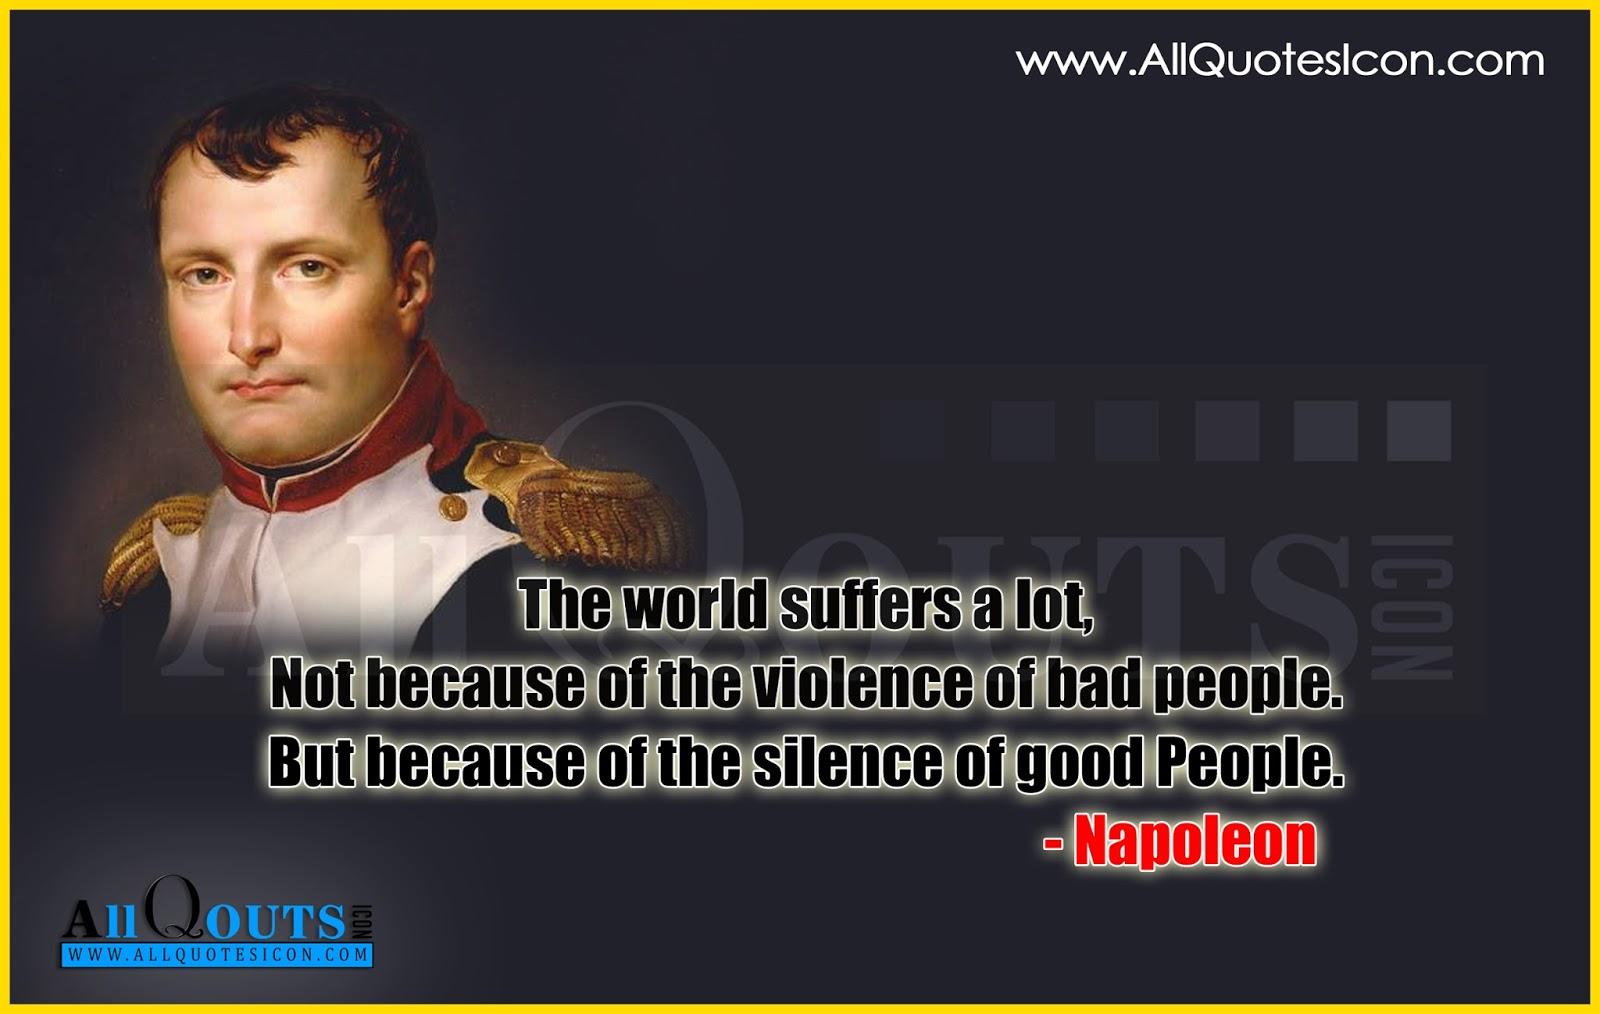 Napolean Quotes in English HD Wallpaper Best Inspirational Thoughts